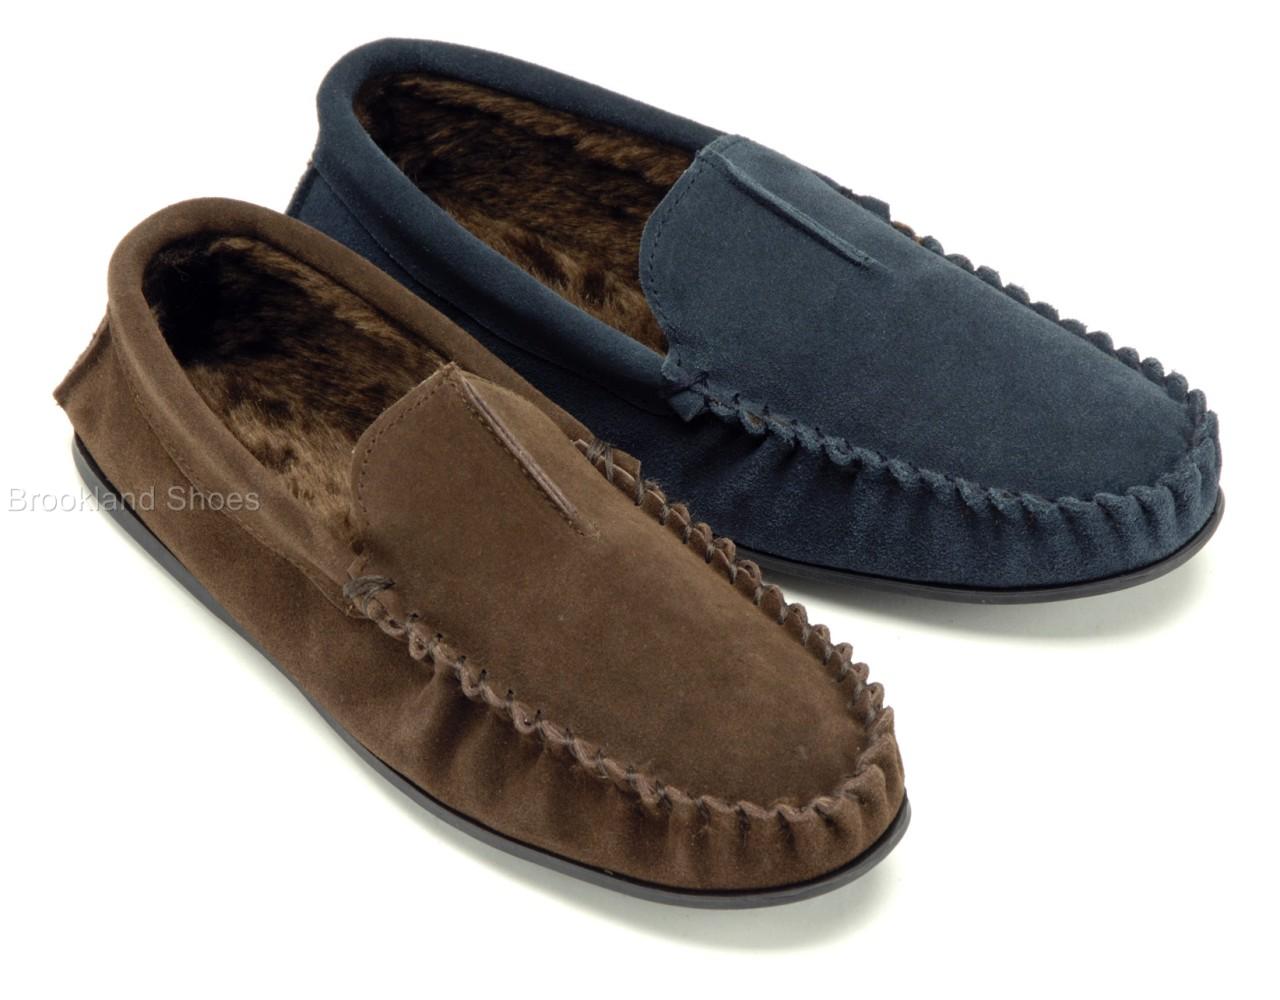 Men's Dunlop Real Leather Moccasin Slippers Size 6 - 11 | eBay